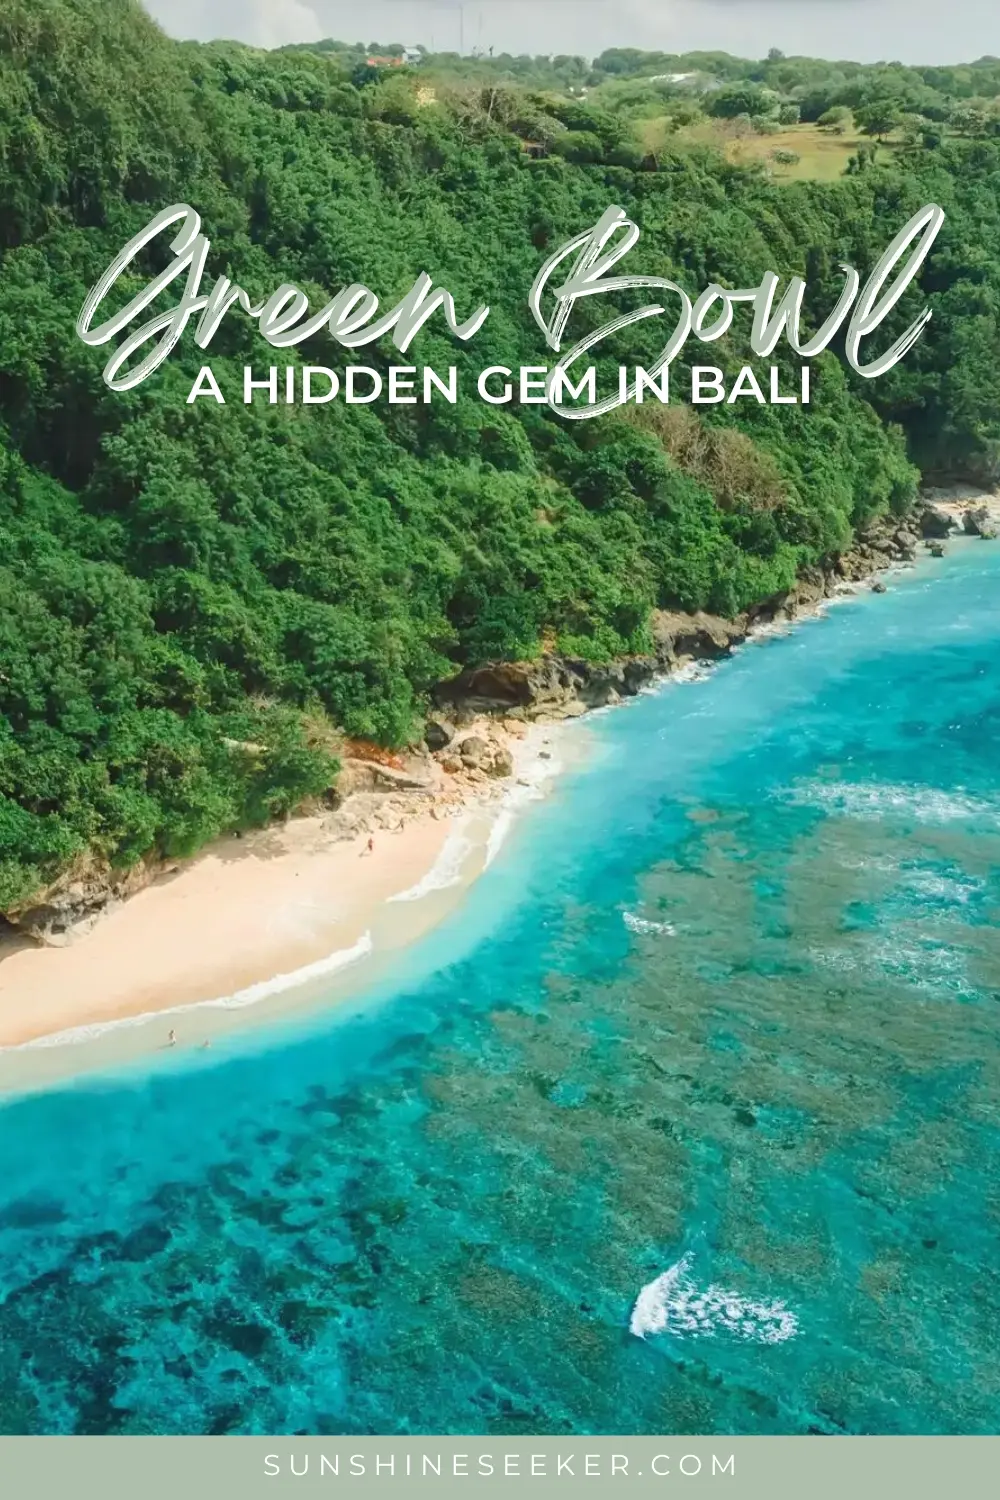 Don't miss Green Bowl Beach while in Bali. It is one of the best surf spots in Uluwatu and a great spot for photos. Click through for a complete guide on how to get to Green Bowl Beach, the best time to visit and what to expect.